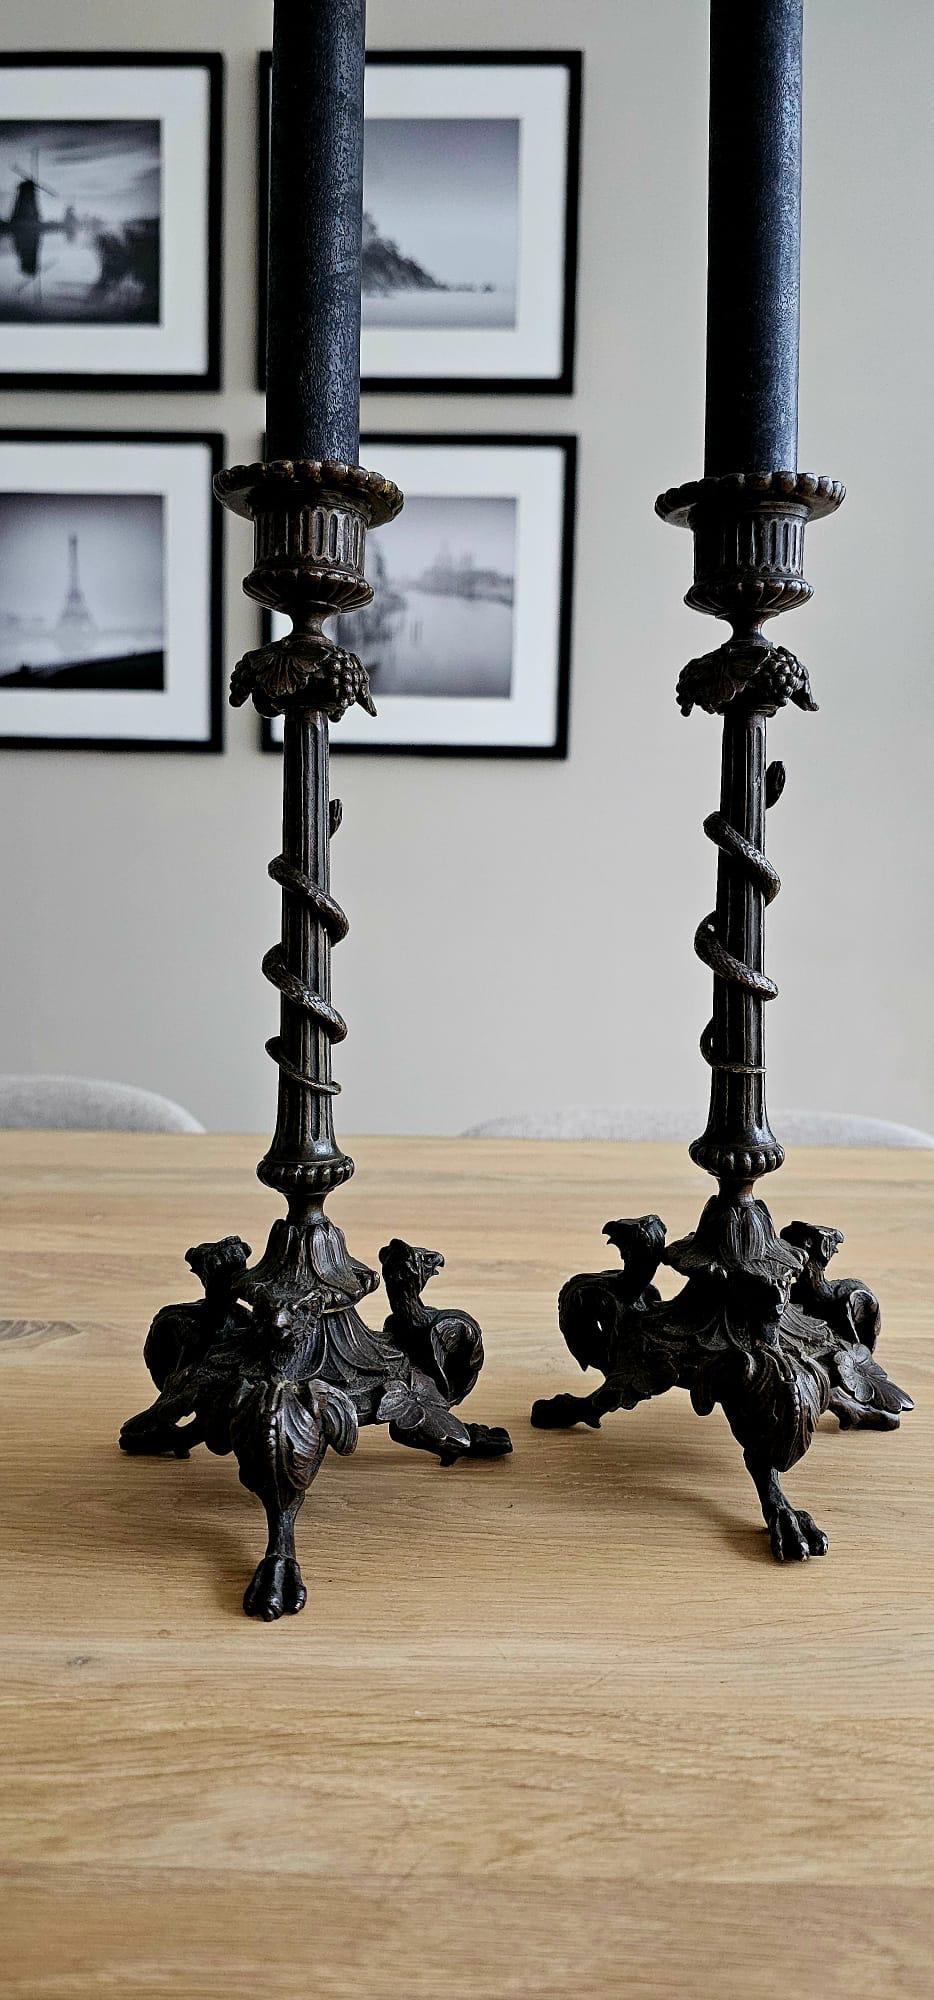 Practical size, antique fine bronze candleholders with original and removable bobeches.

If you are looking for excellent condition antiques to create the perfect atmosphere then this attractive and decorative pair of bronze candlesticks could be